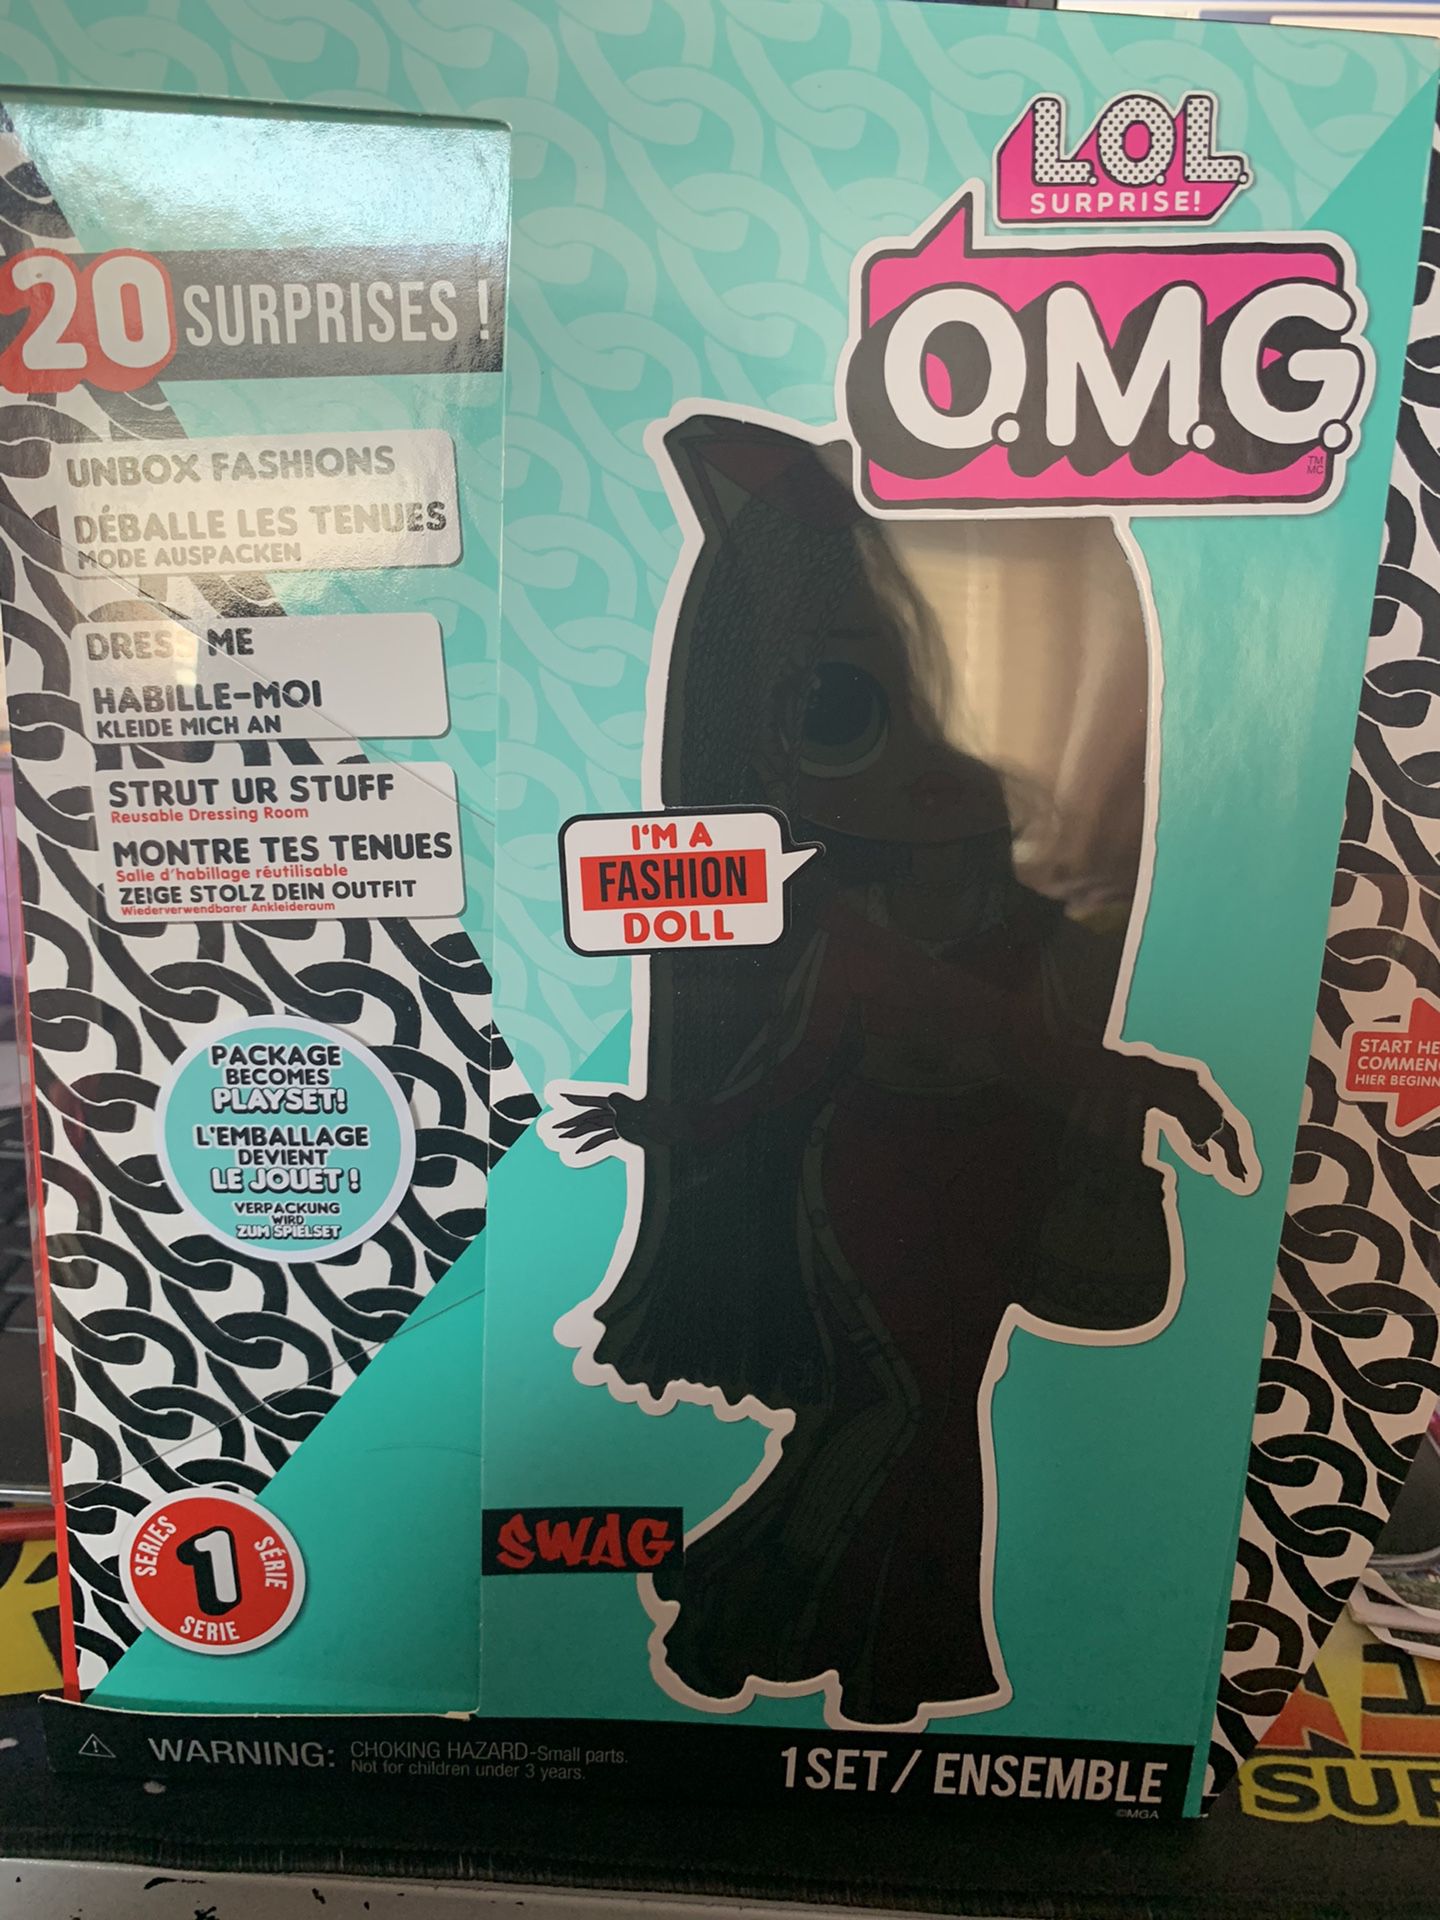 LOL OMG Series 1 Swag Fashion Doll with 20 Surprises